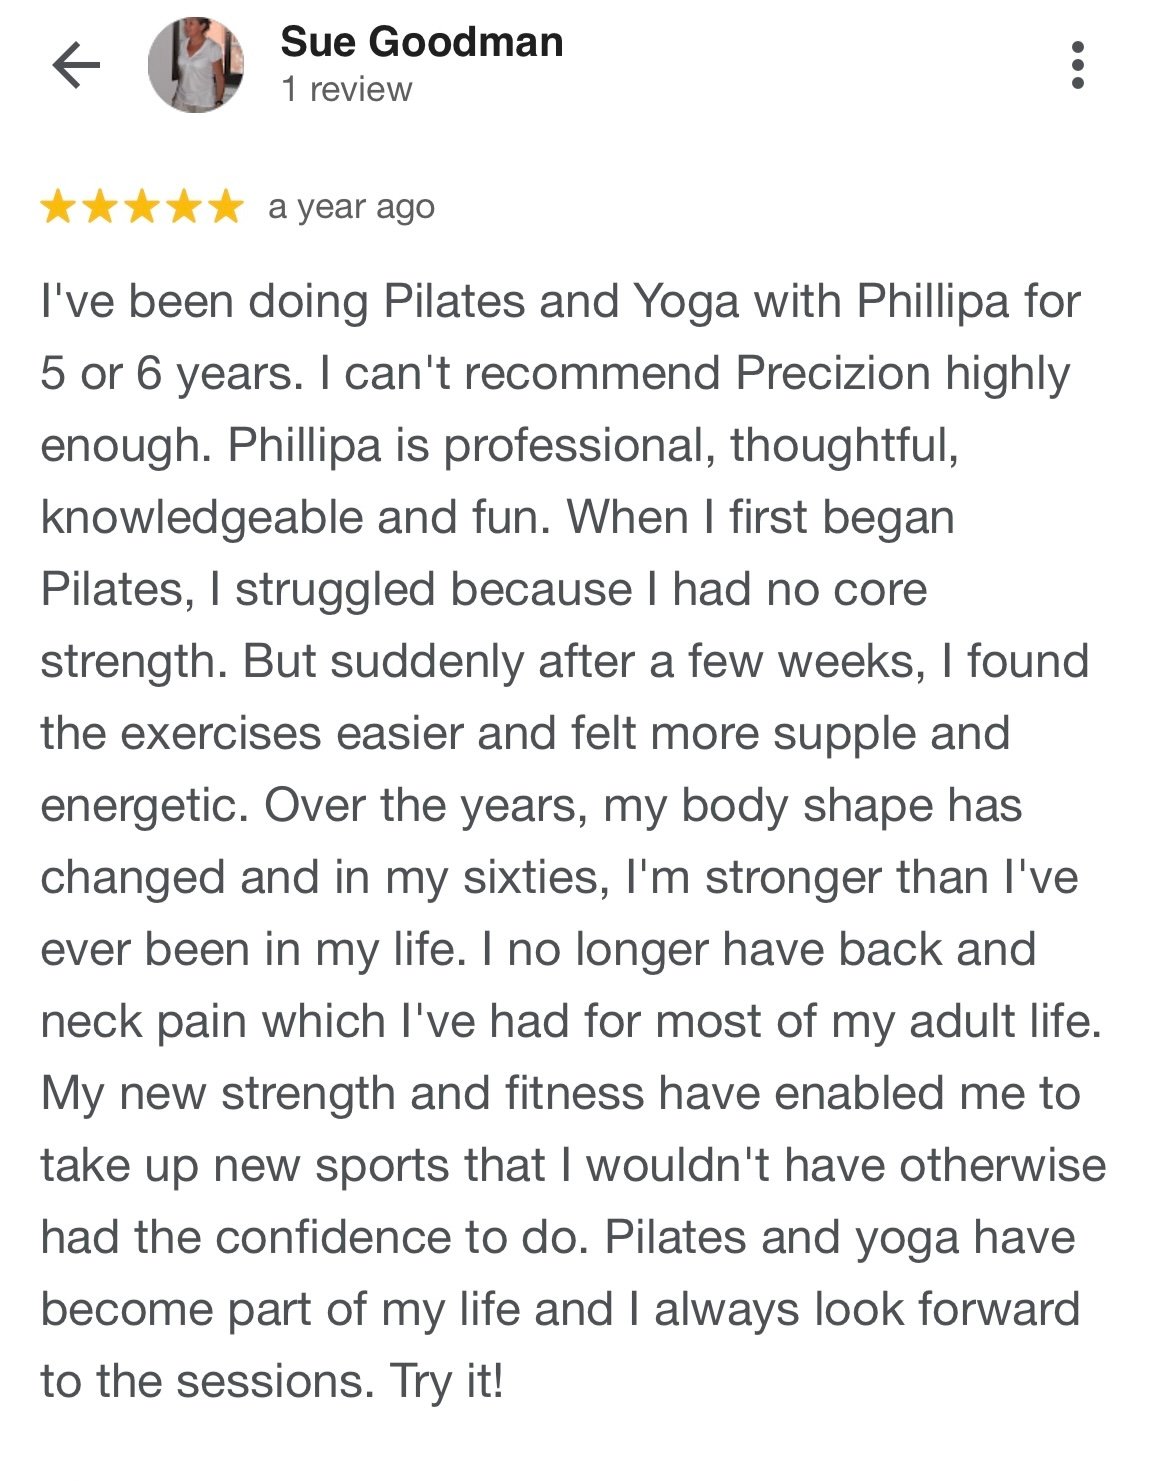 hatha yoga classes physiotherapist online reviews uk